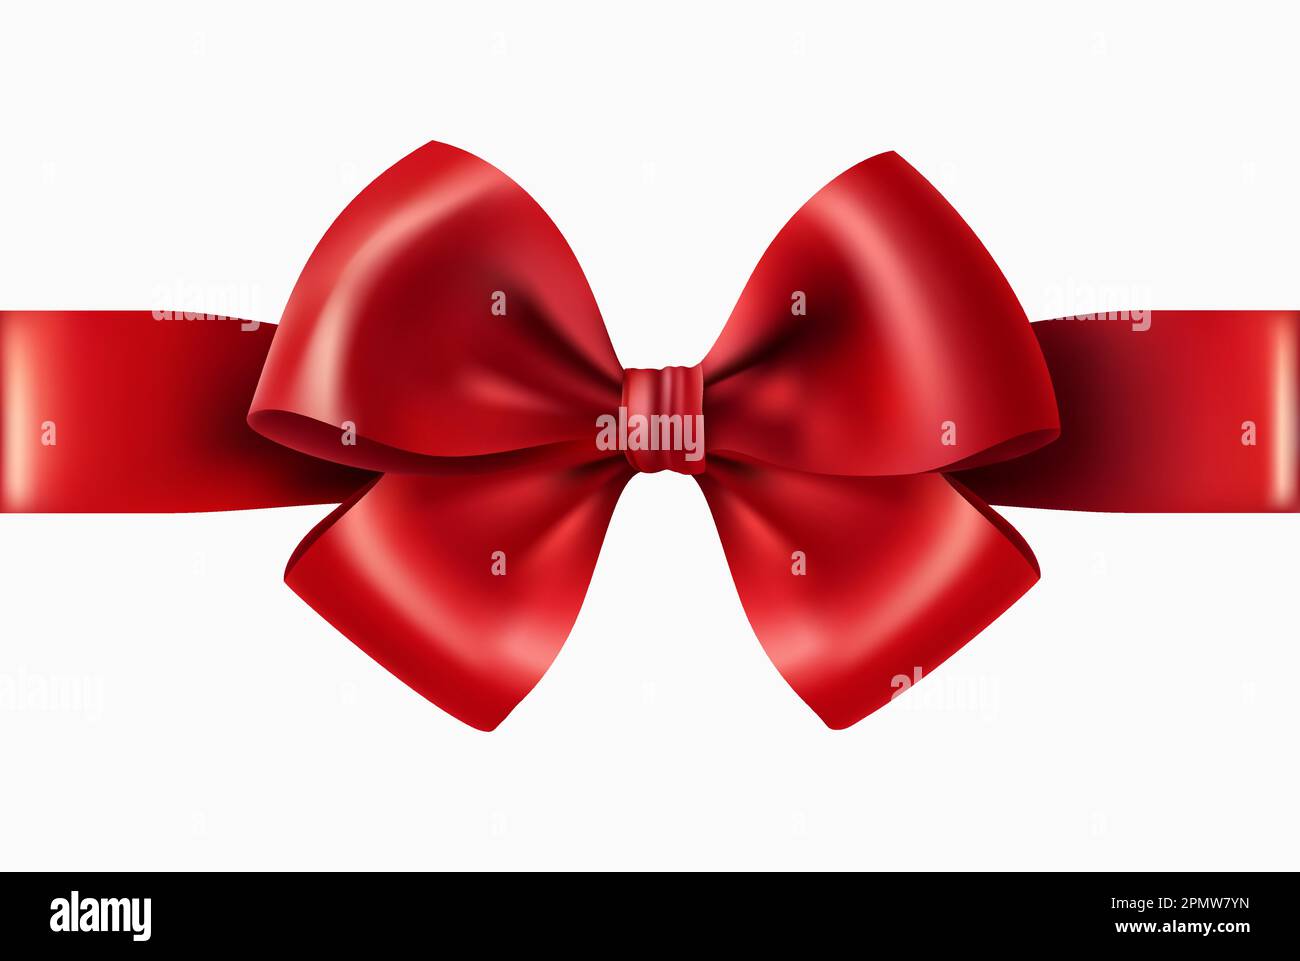 Red silk ribbon stock photo. Image of package, ornate - 45656550